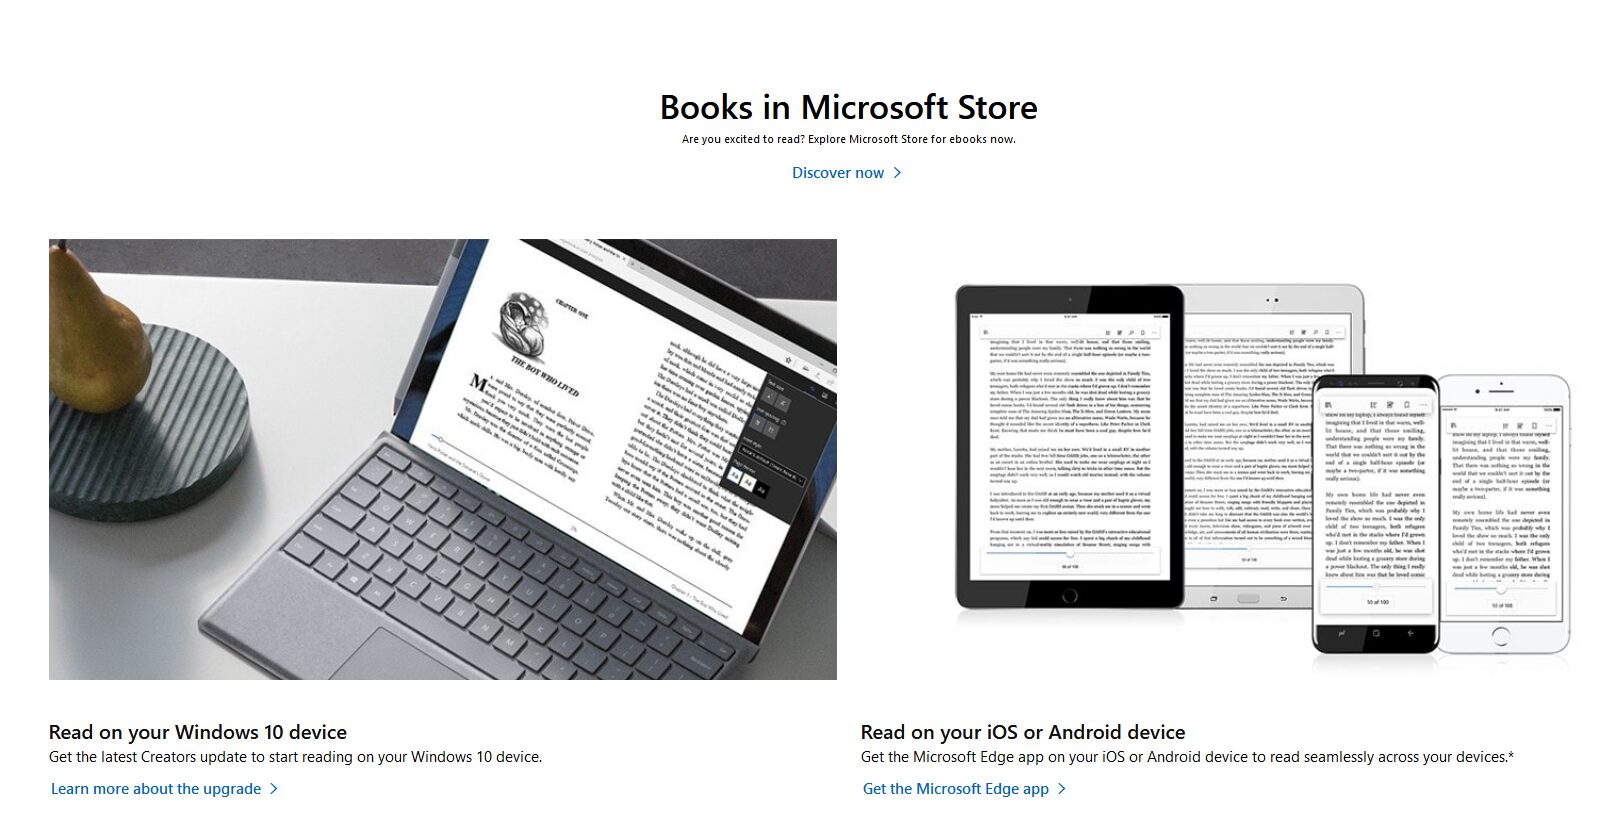 Microsoft Removes Book Section From Microsoft Store